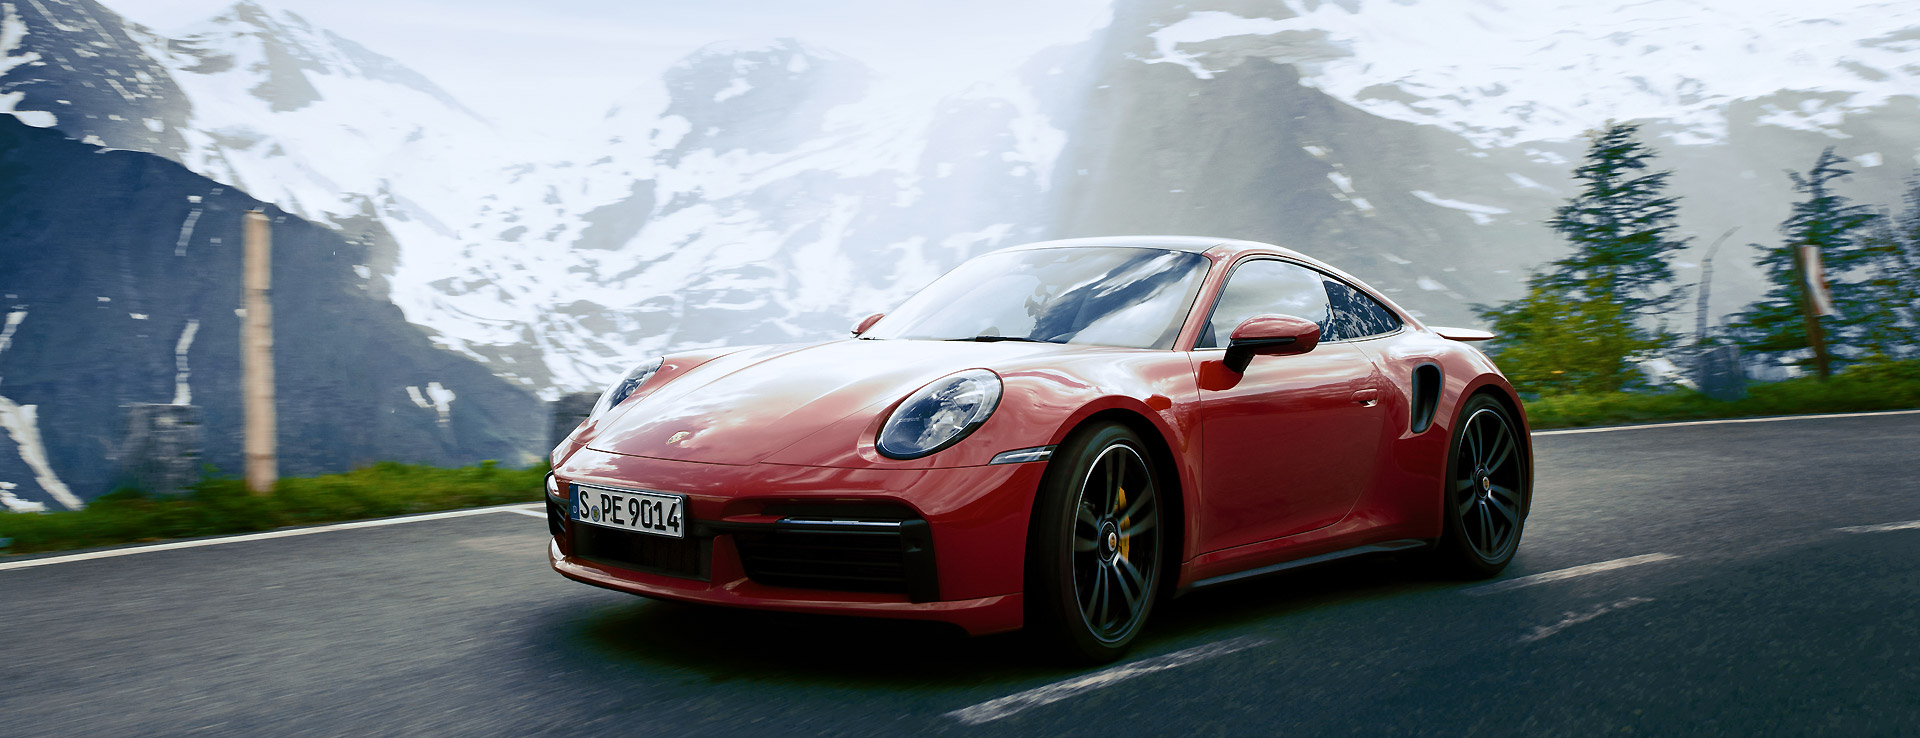 Porsche 911 turbo s driving in front of a mountain range